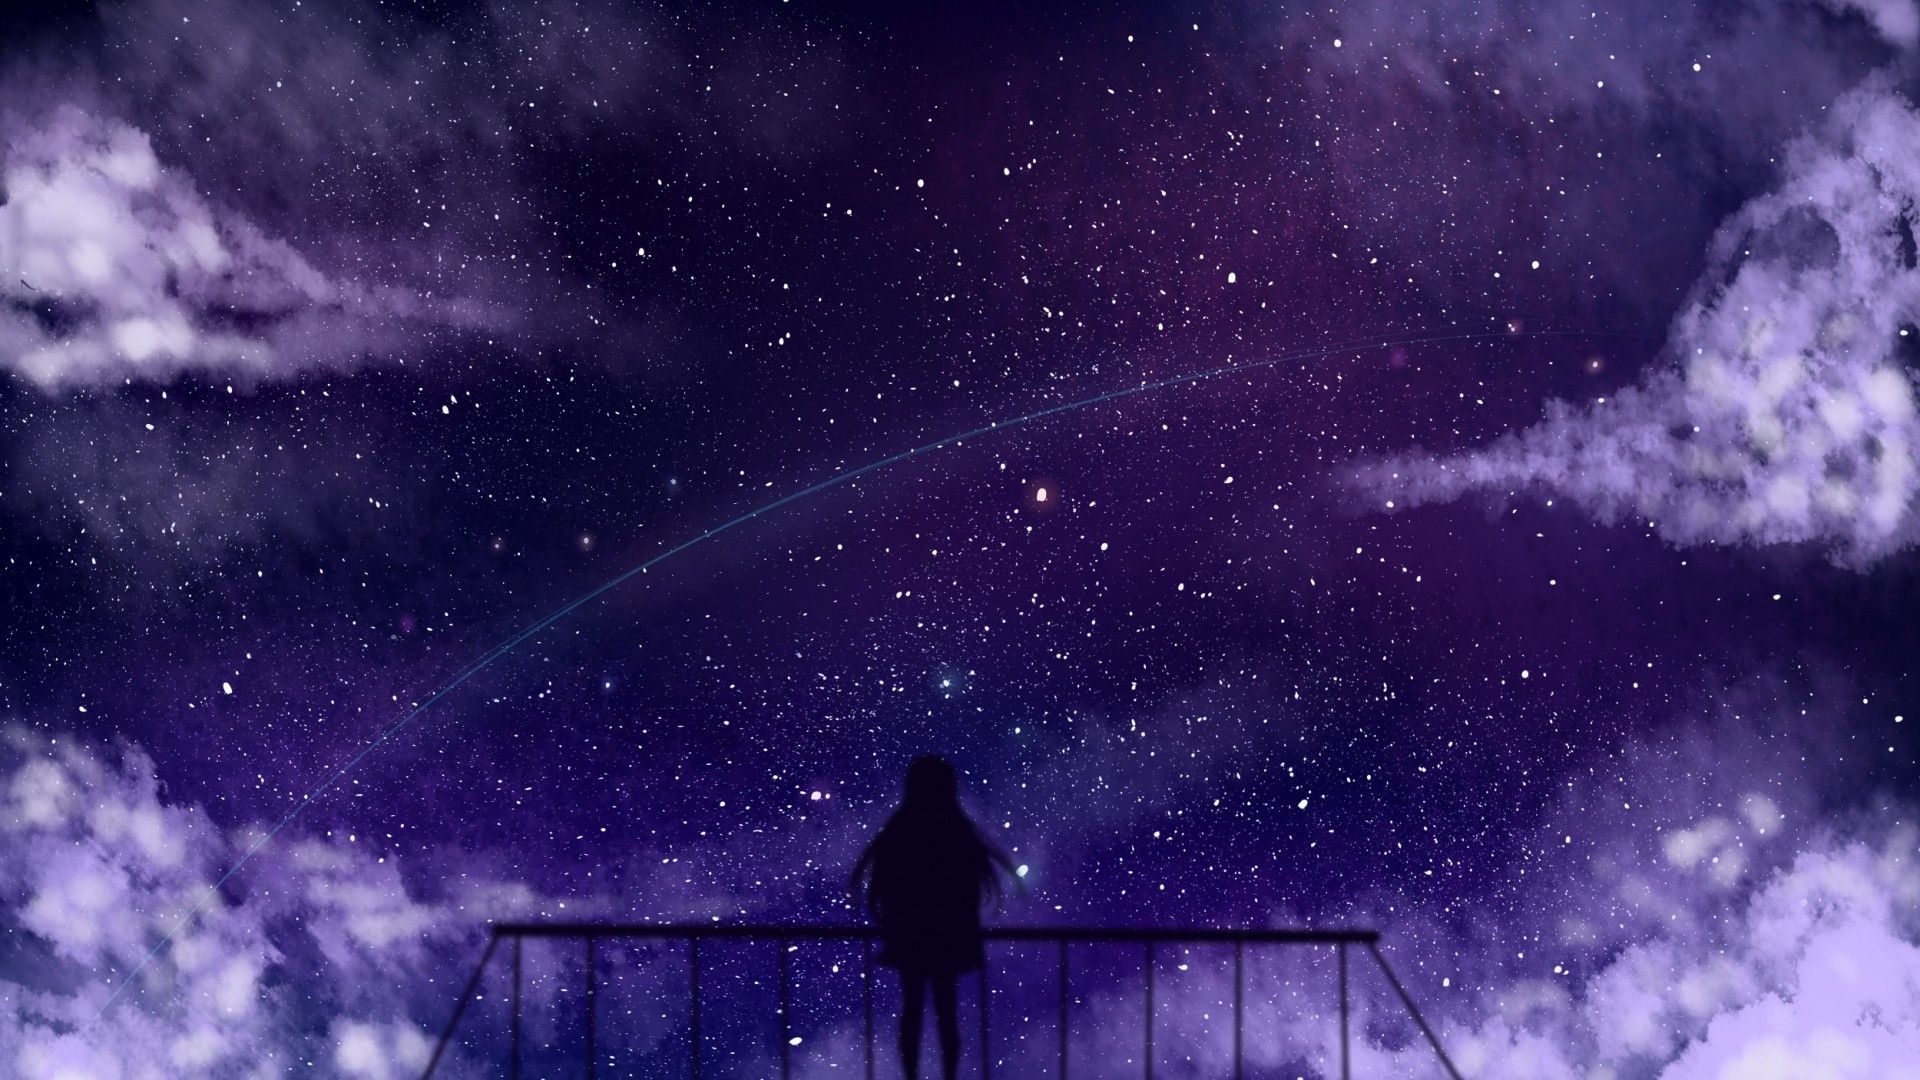 Download 1920x1080 Anime Girl, Silhouette, Stars, Falling Star, Clouds Wallpaper for Widescreen